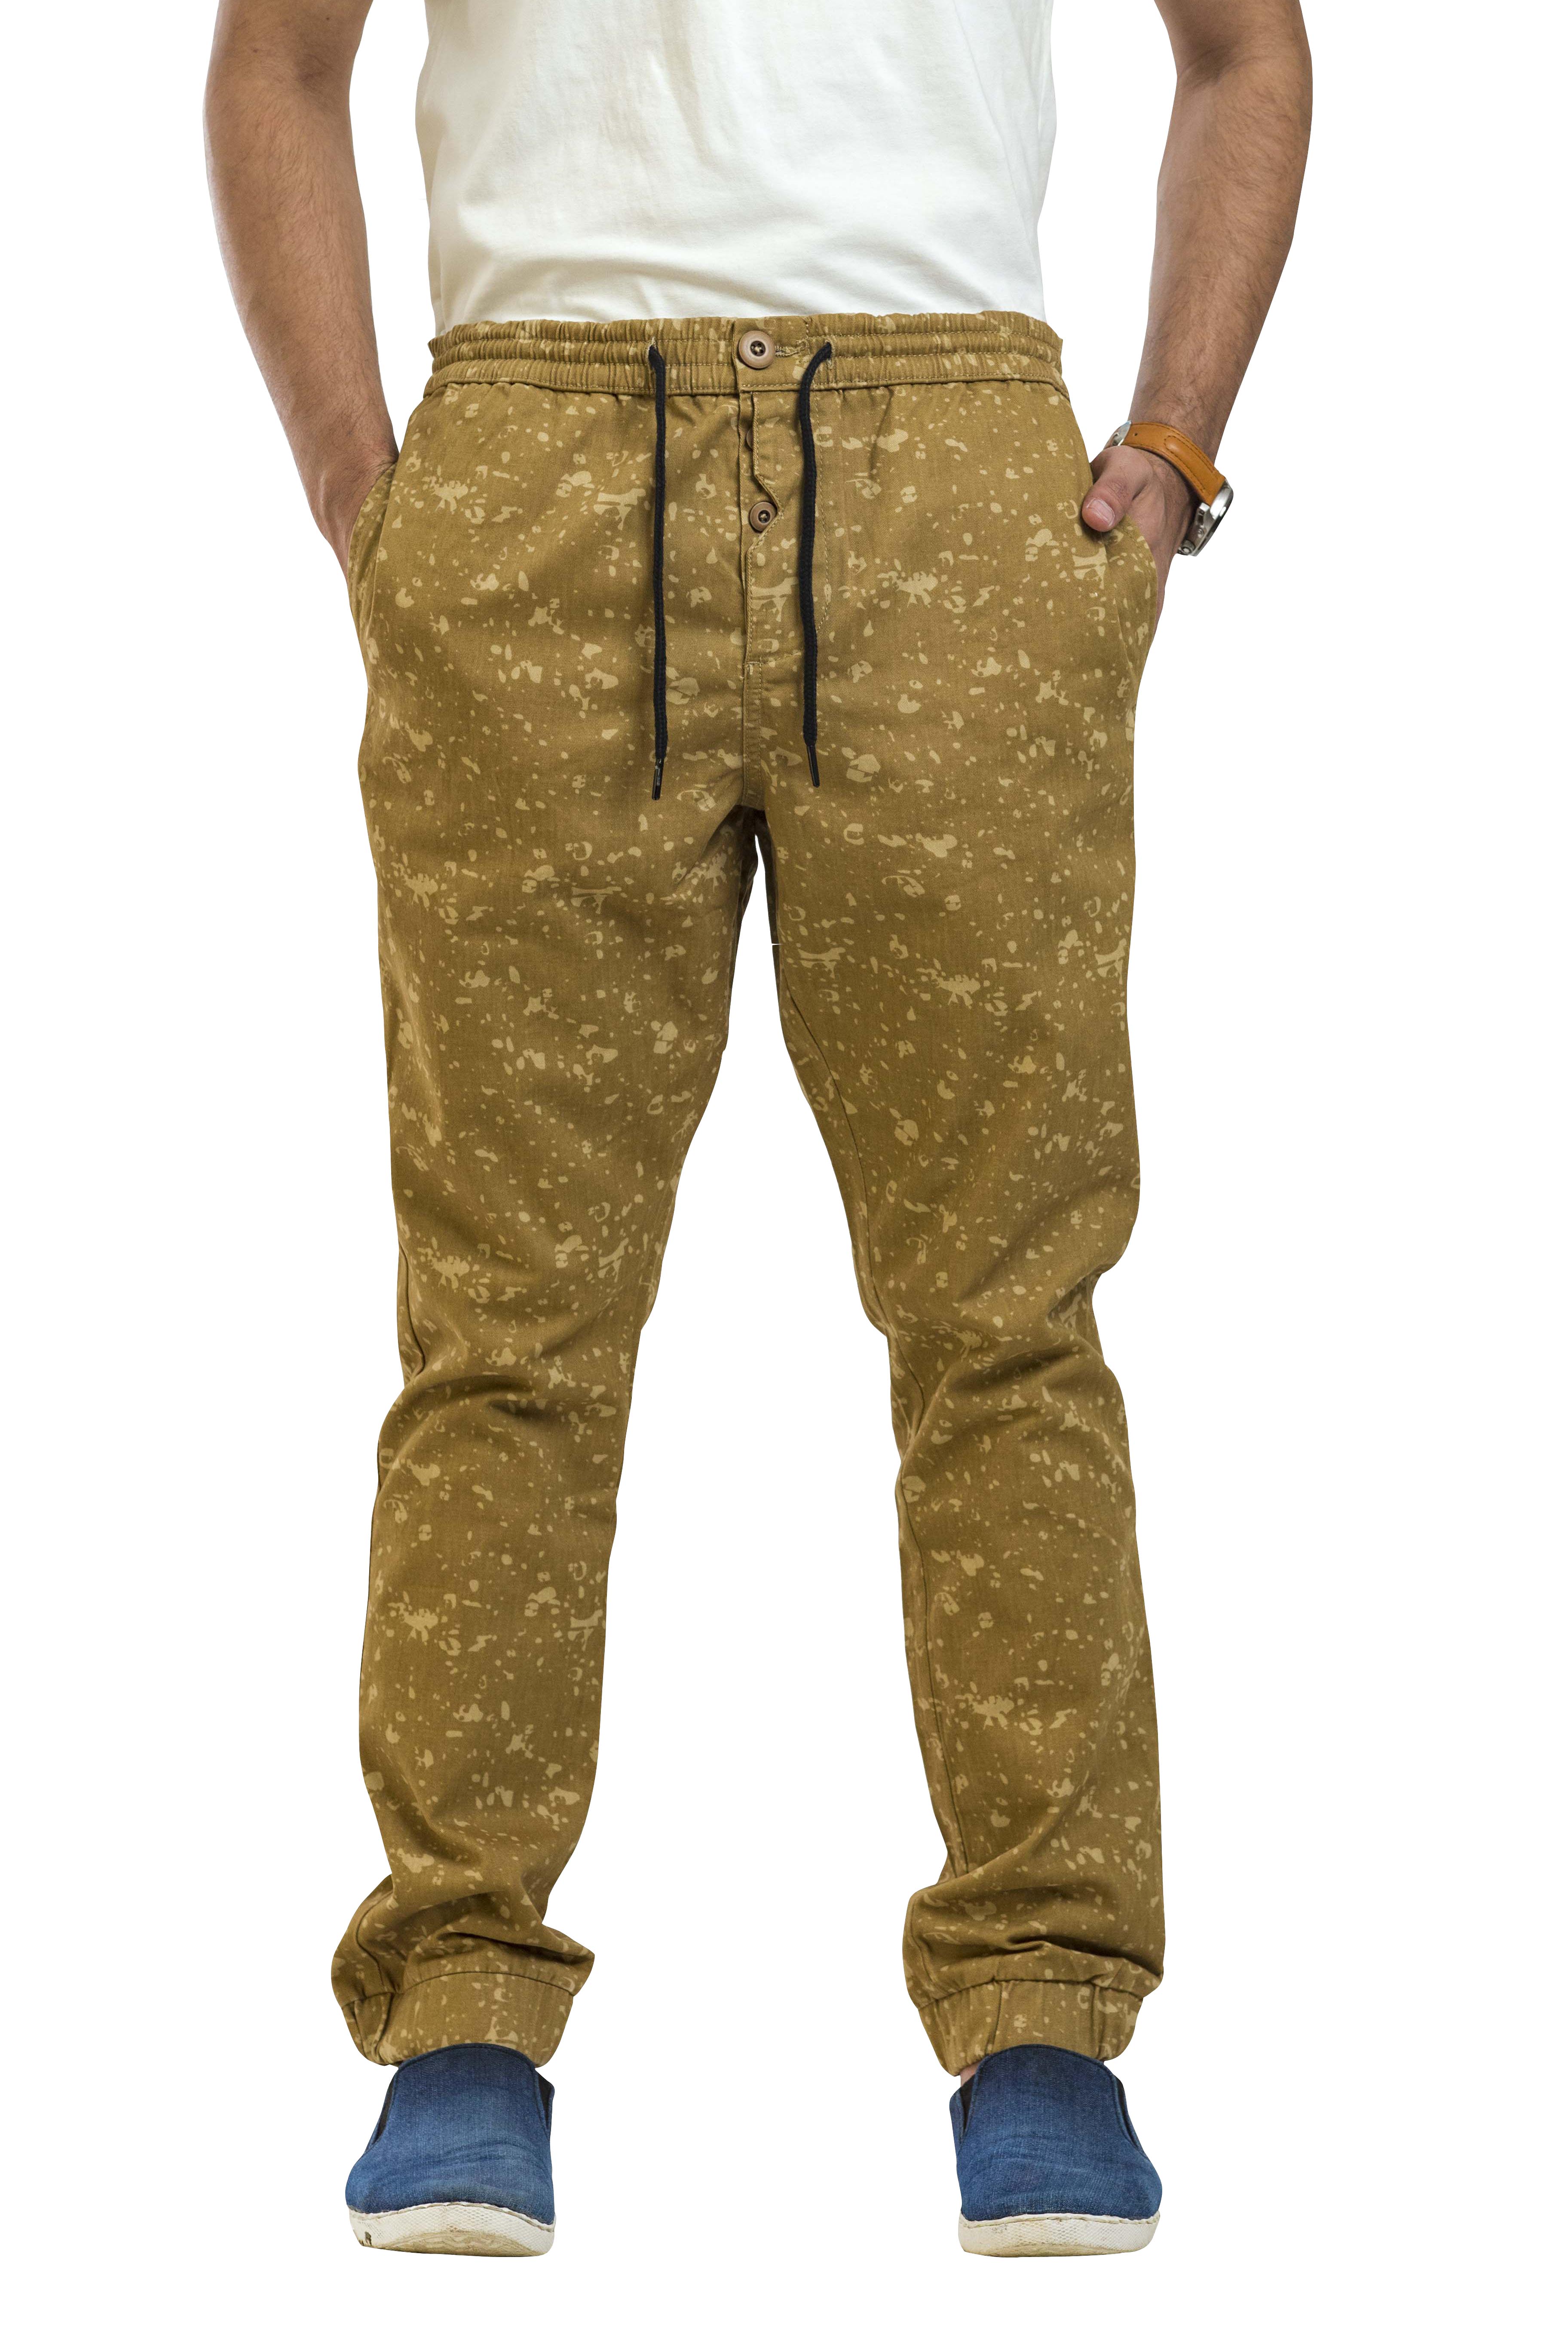 Mens Casual Cotton Slim Fit Cargo Pants Fashion Sports Stretch Trousers  Streets | eBay